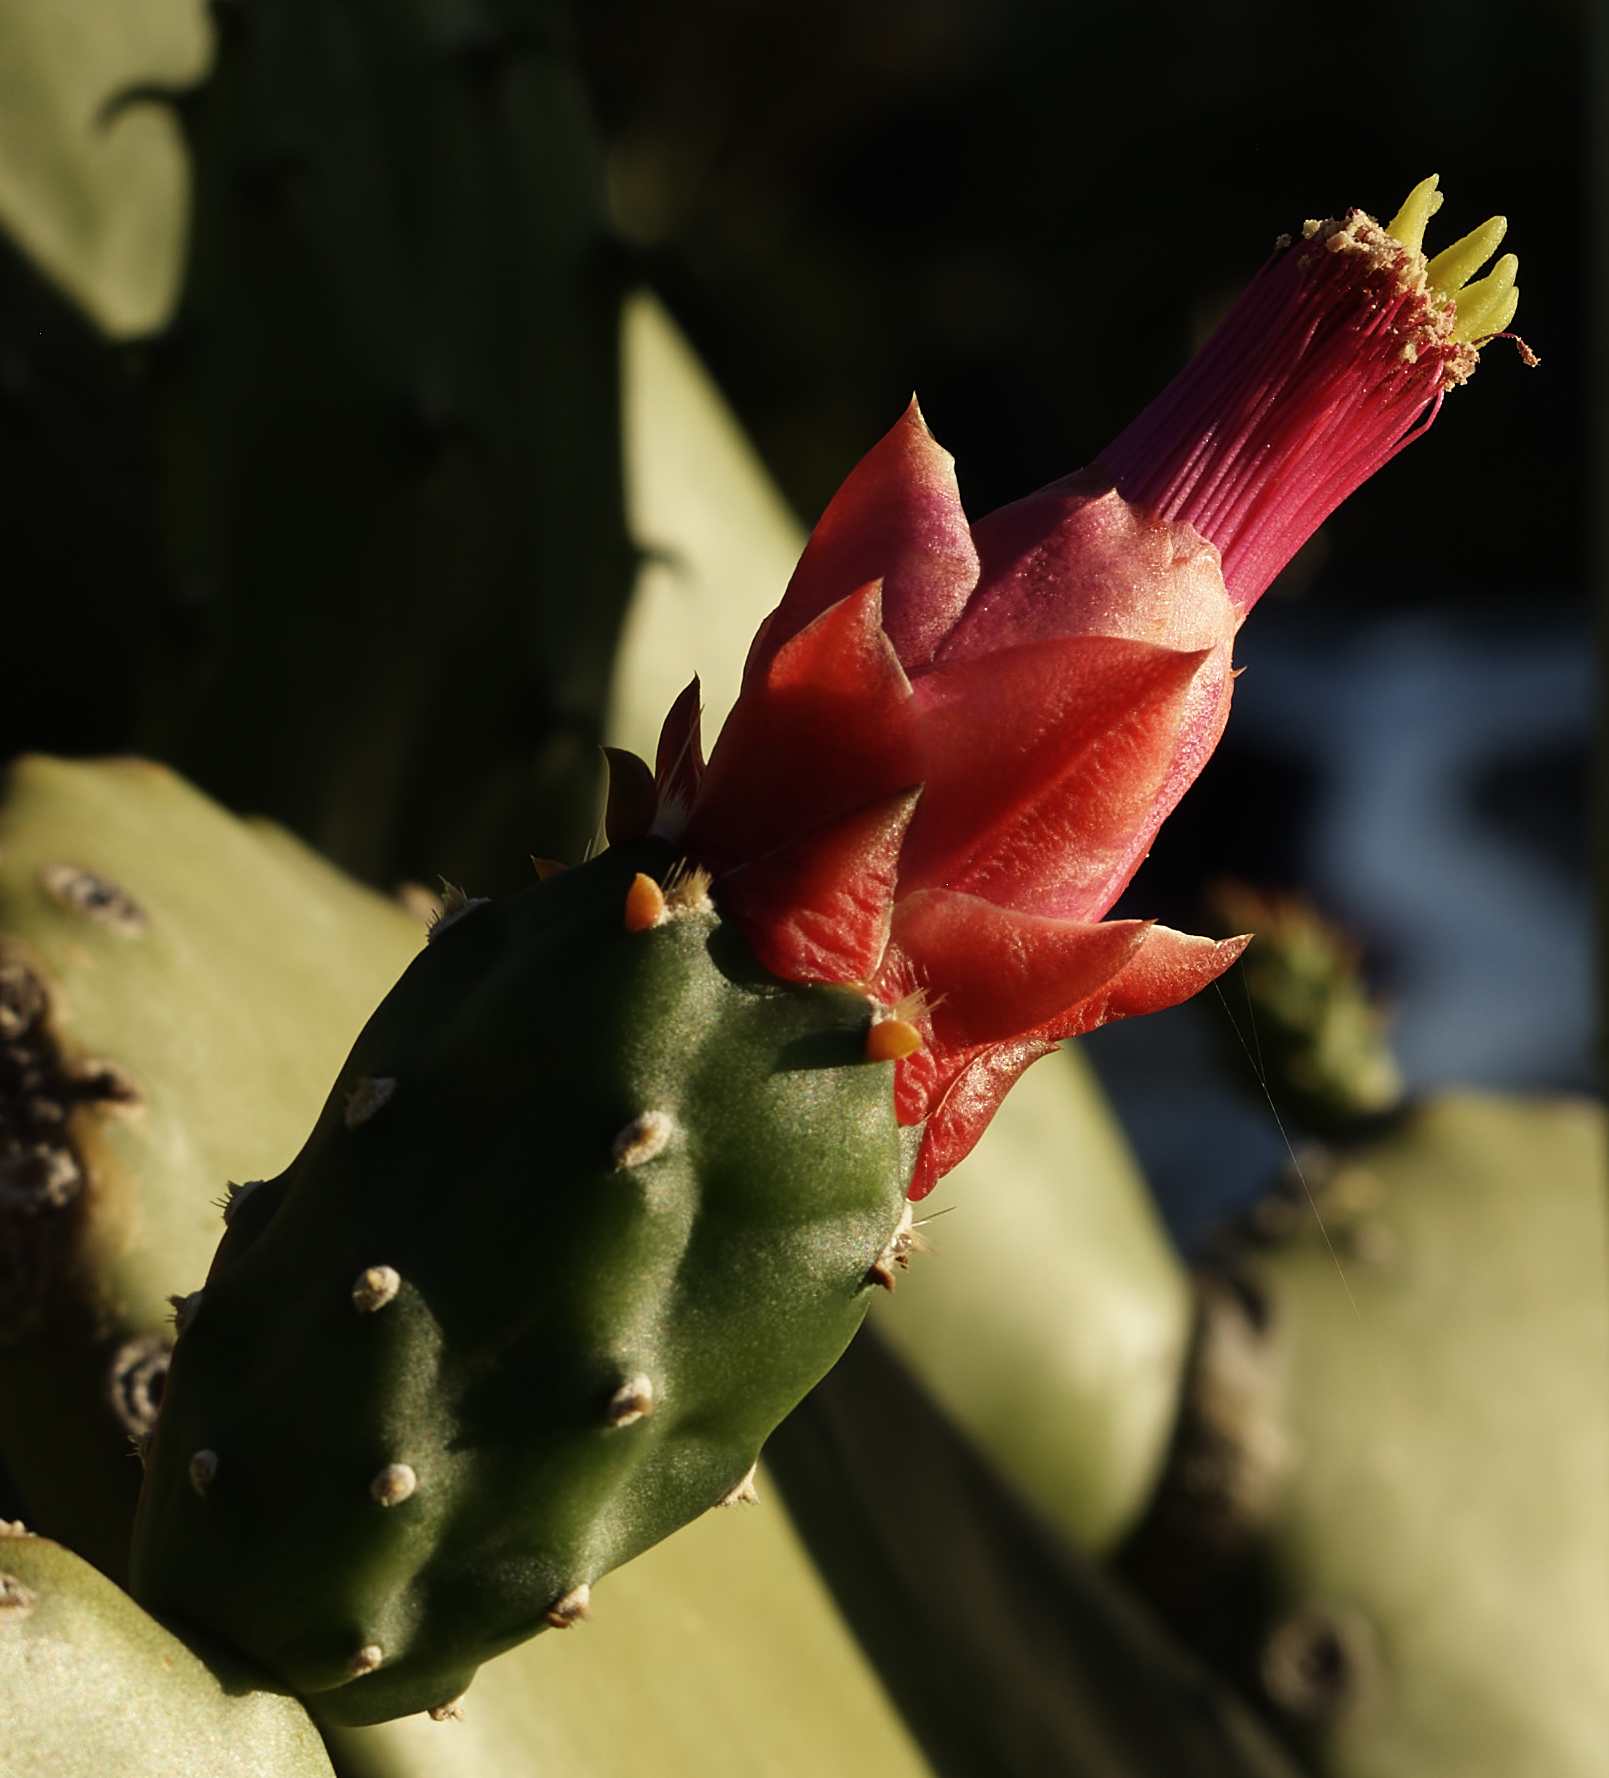 Prickly Pear with IQ - © Jeffrey H. Lubeck & MESH Art LLC - all rights reserved.